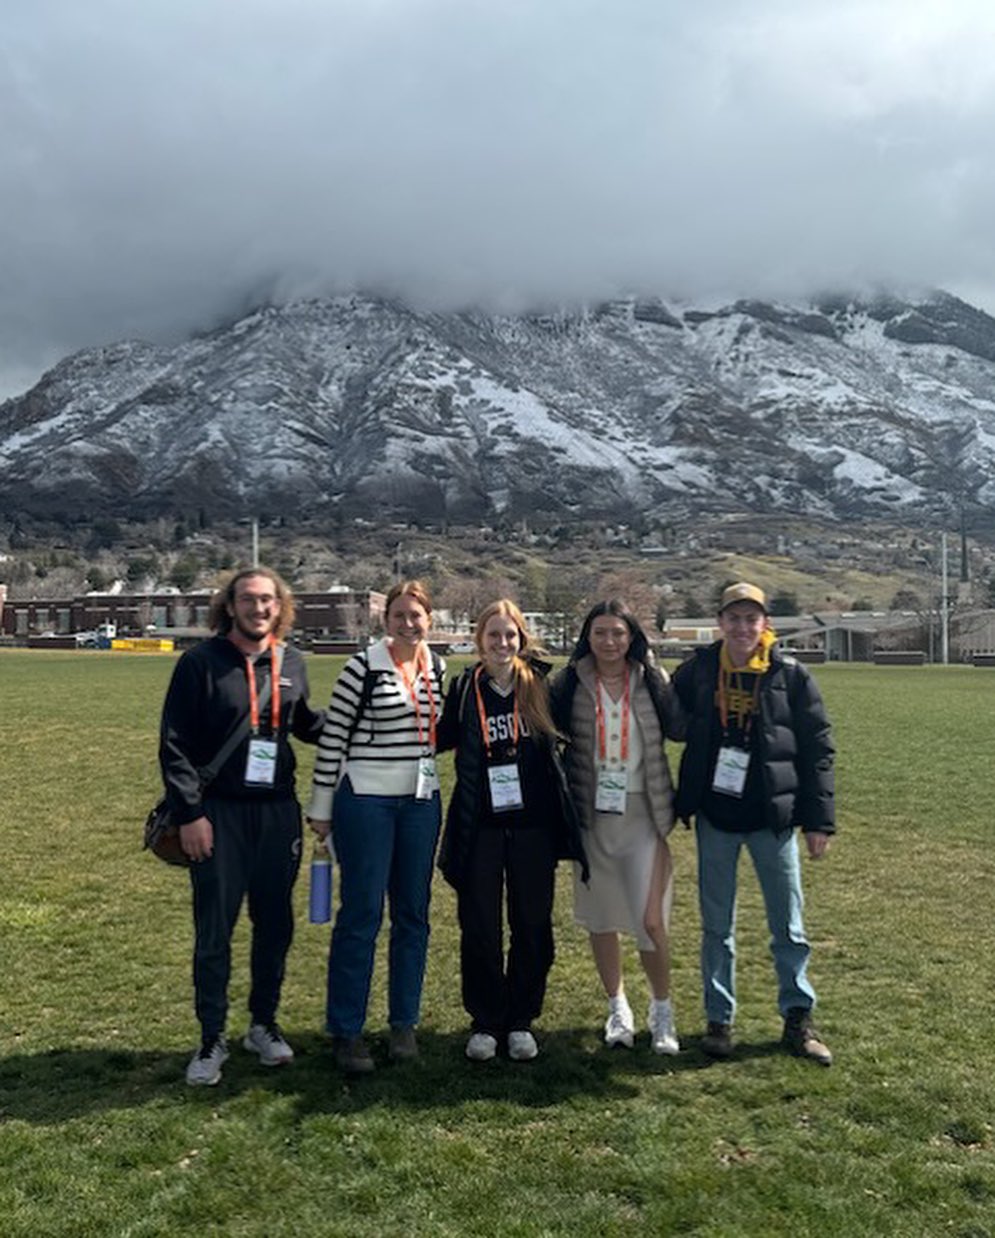 Five students pose in front of mountains.